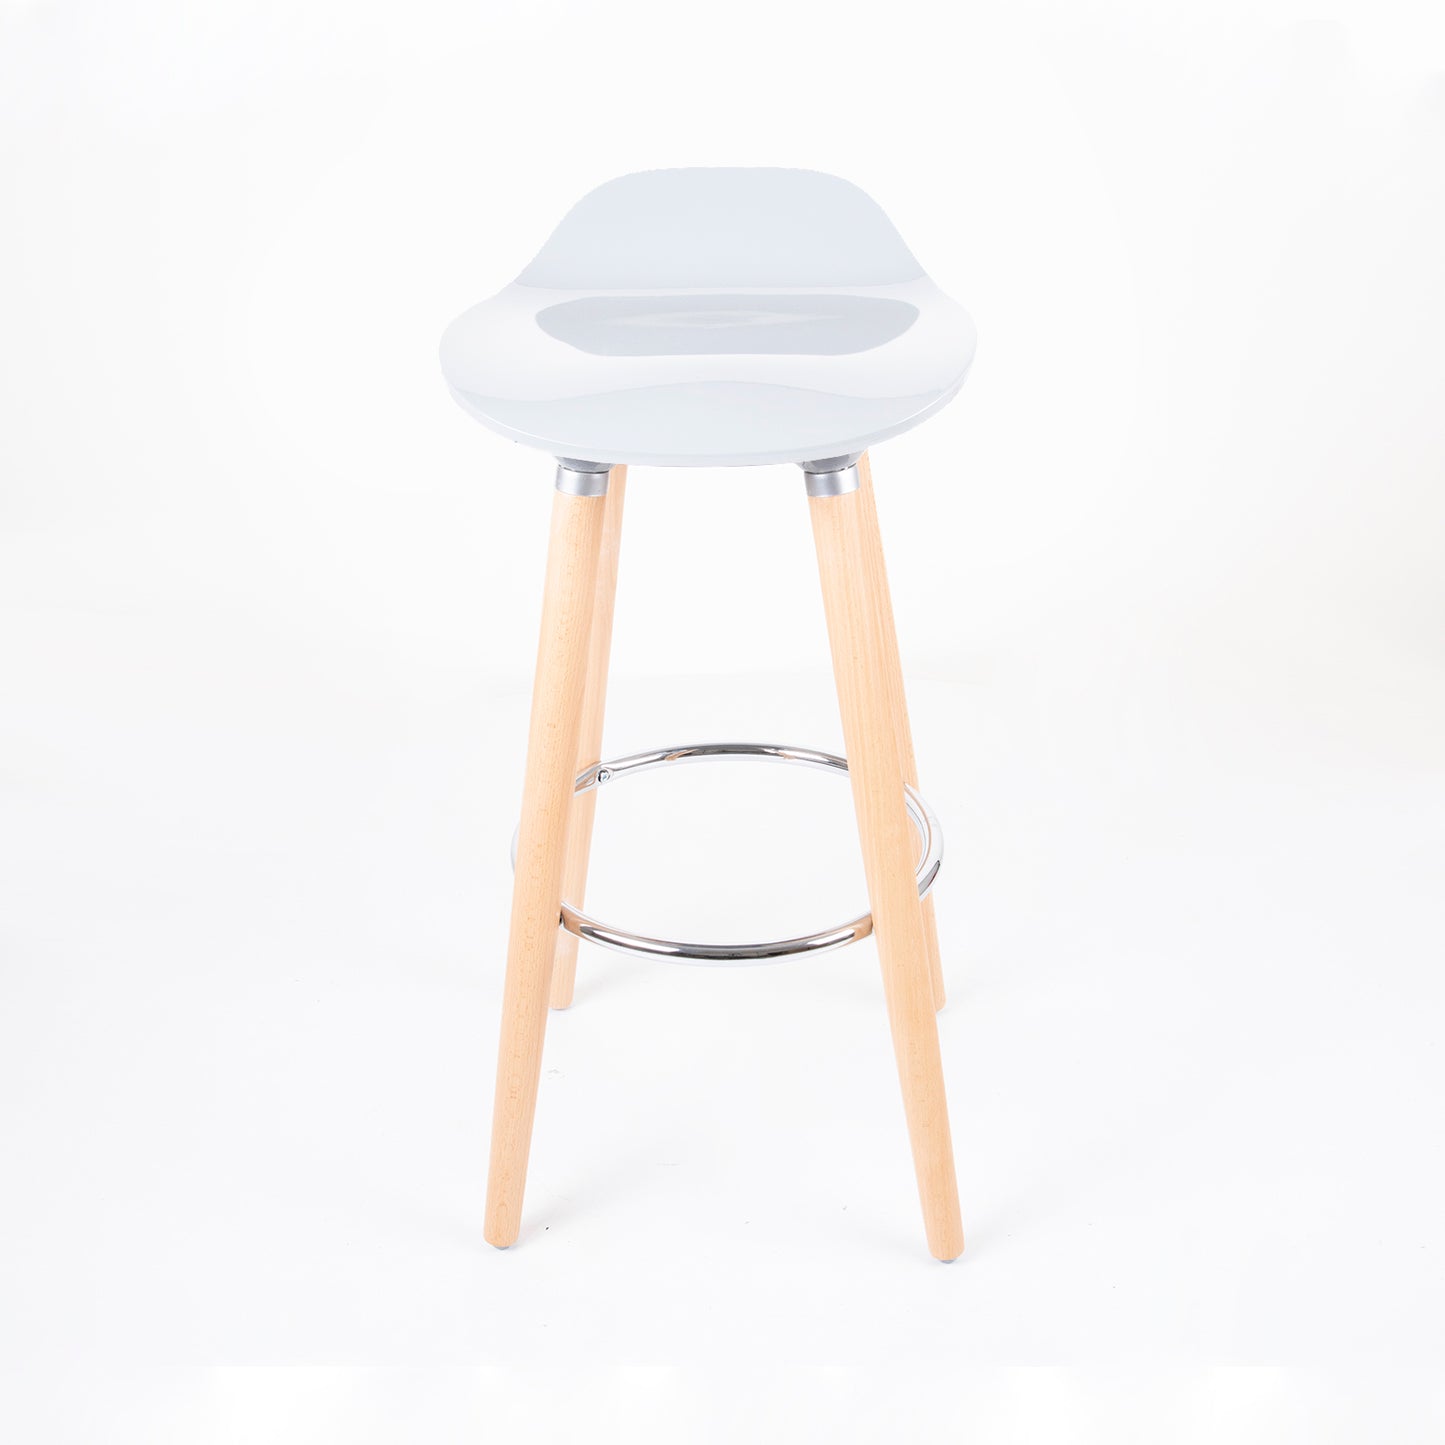 Pack of 2 ABS Bar Stool Round - White